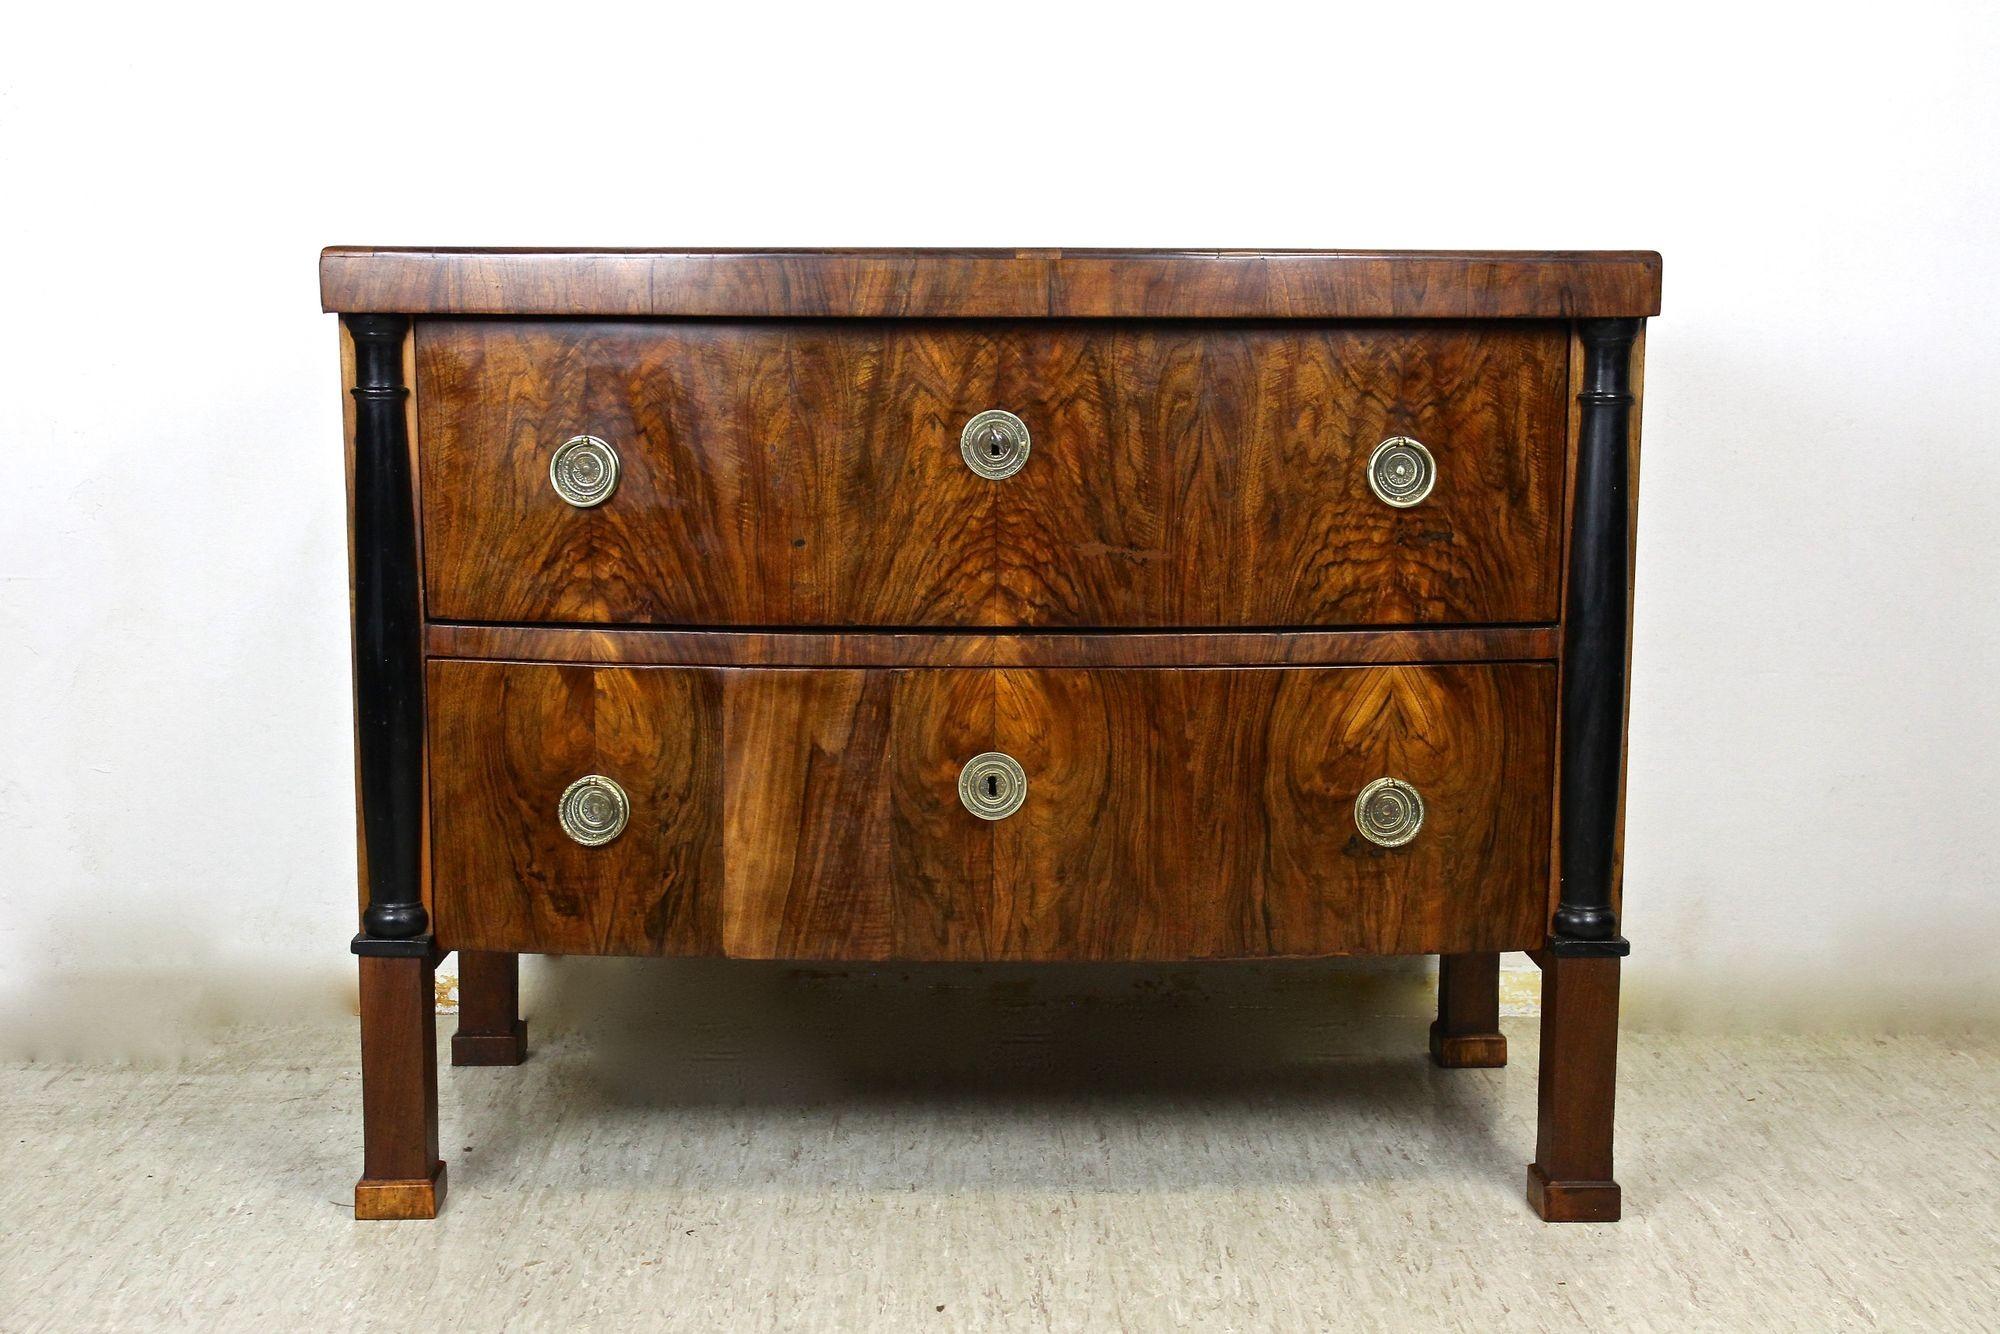 Exceptional Biedermeier nutwood chest of drawers from the early 19th Century in Austria. An eye-catching two-drawer commode from the famous Biedermeier period in Vienna around 1825 which holds the still original, fully functional locks. Veneered